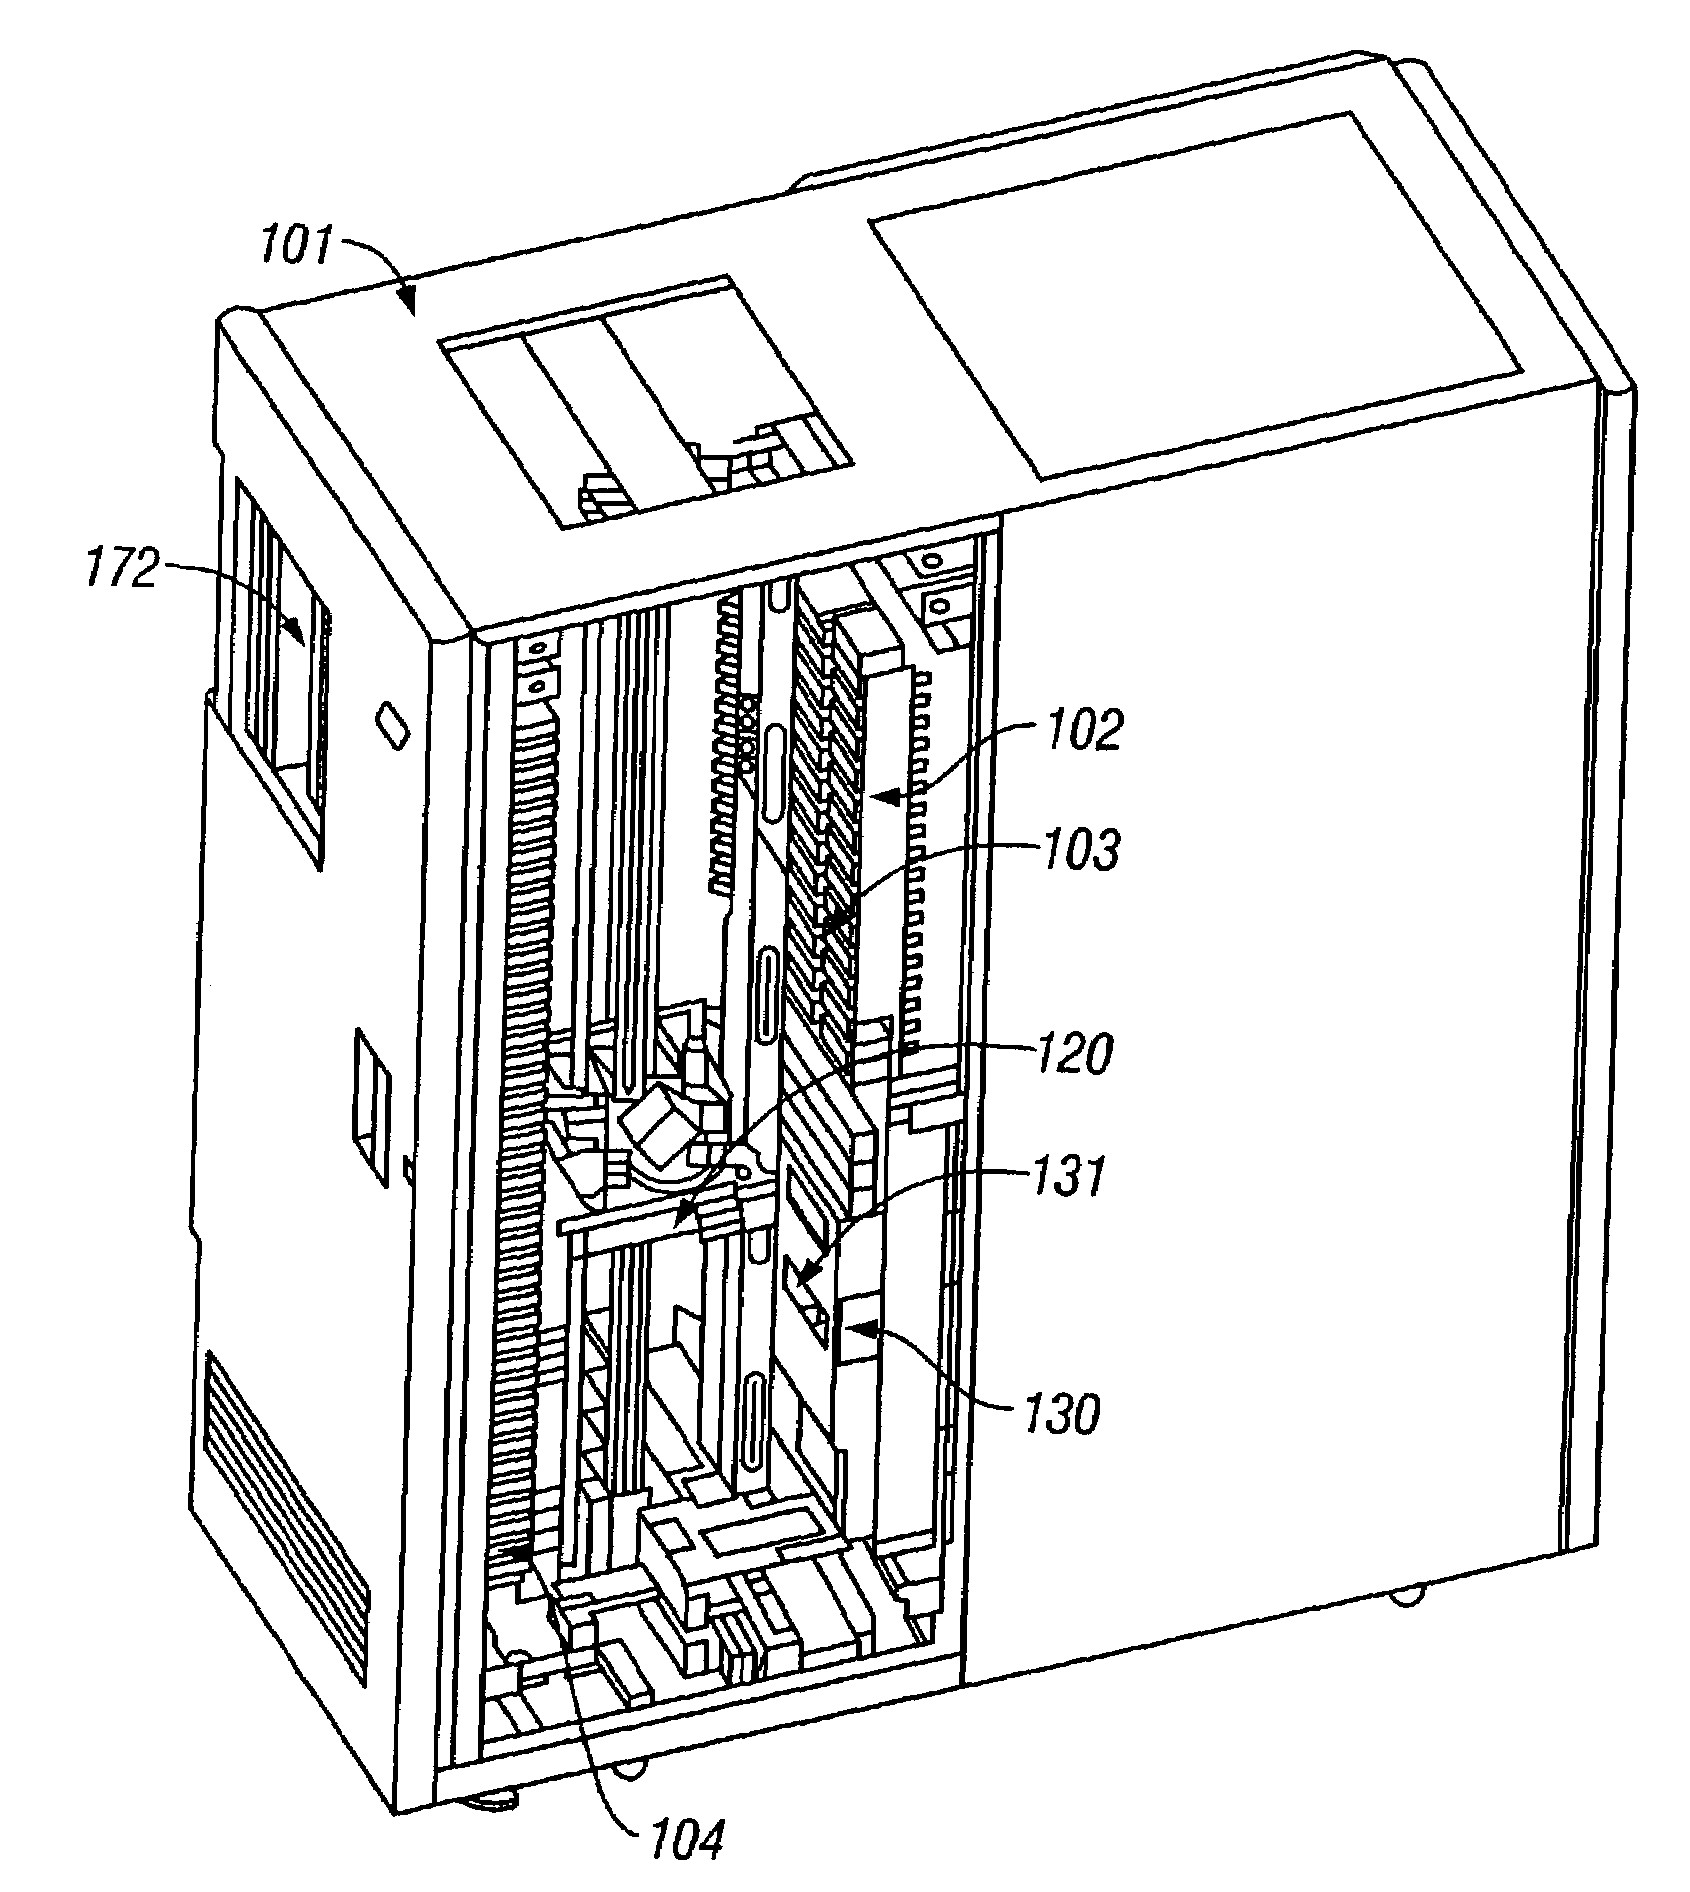 System and method of providing and relocating a portable storage canister in an automated data storage library